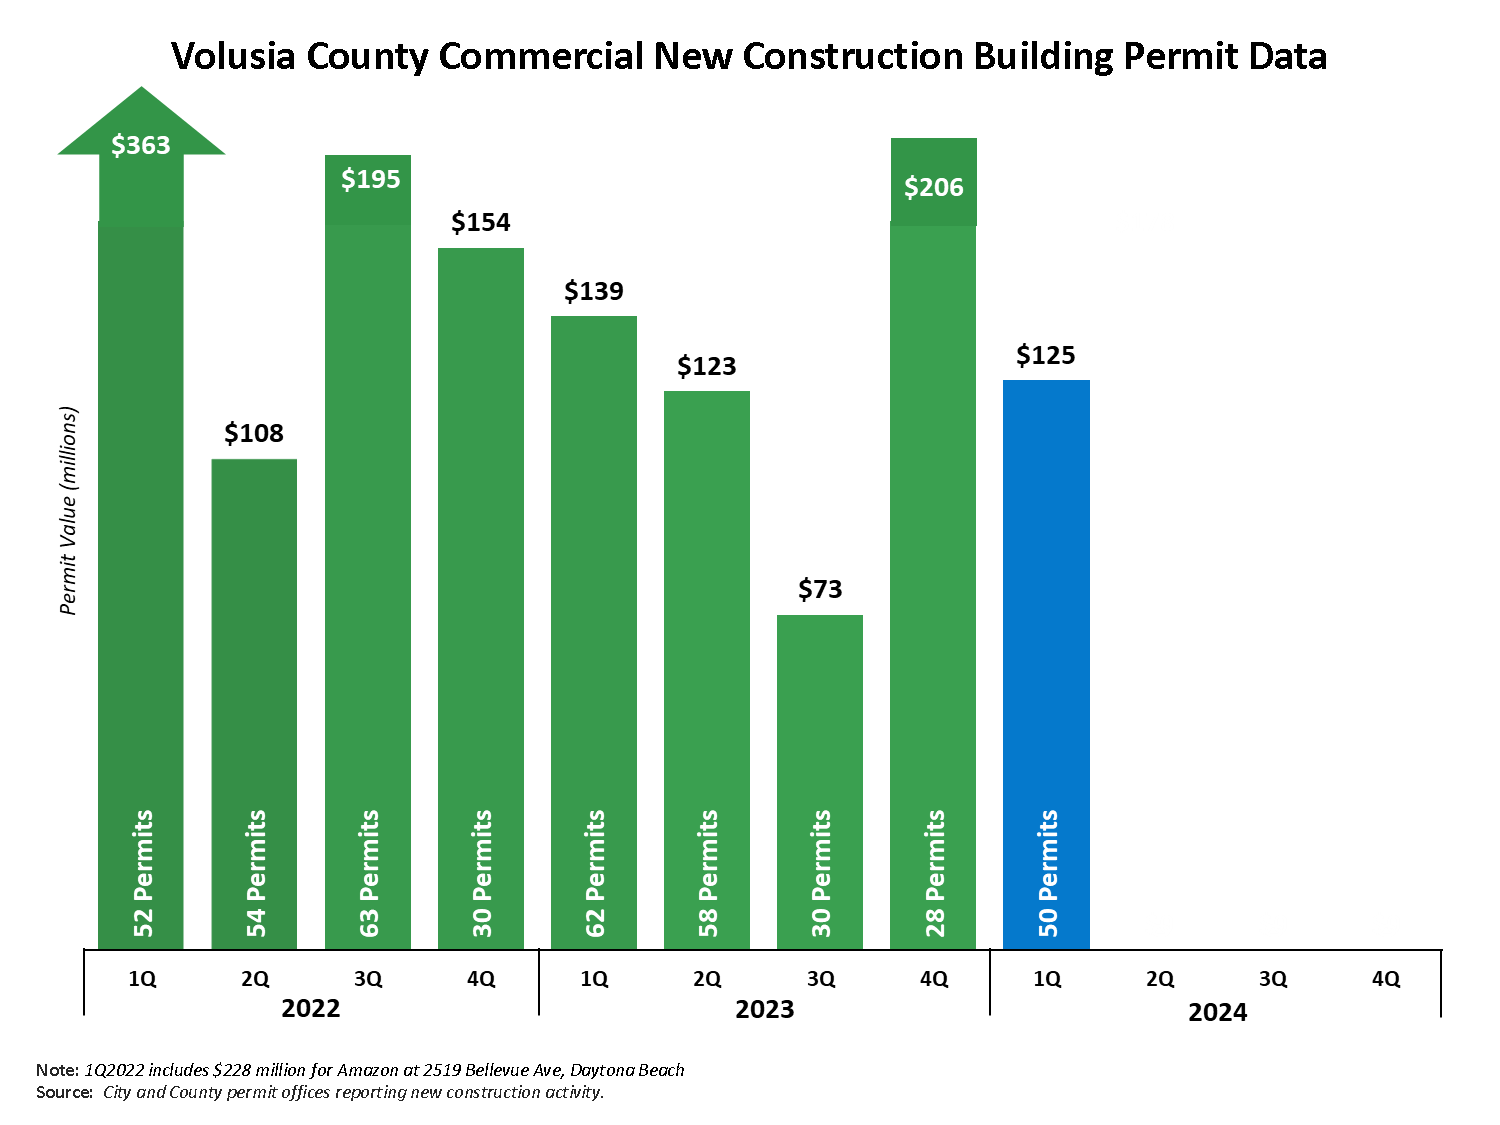 This chart shows a 3-year history by quarter of new commercial construction building permits in Volusia County. There were 31 commercial building permits issued in the 3rd quarter 2023 for a value of $75 million. This brings the year-to-date total to 151 permits with a value of $337 million. In 2022, there was a total of 199 permits and a value of $820 million. Total permits for 2021 were 203 for a value of $336 million.